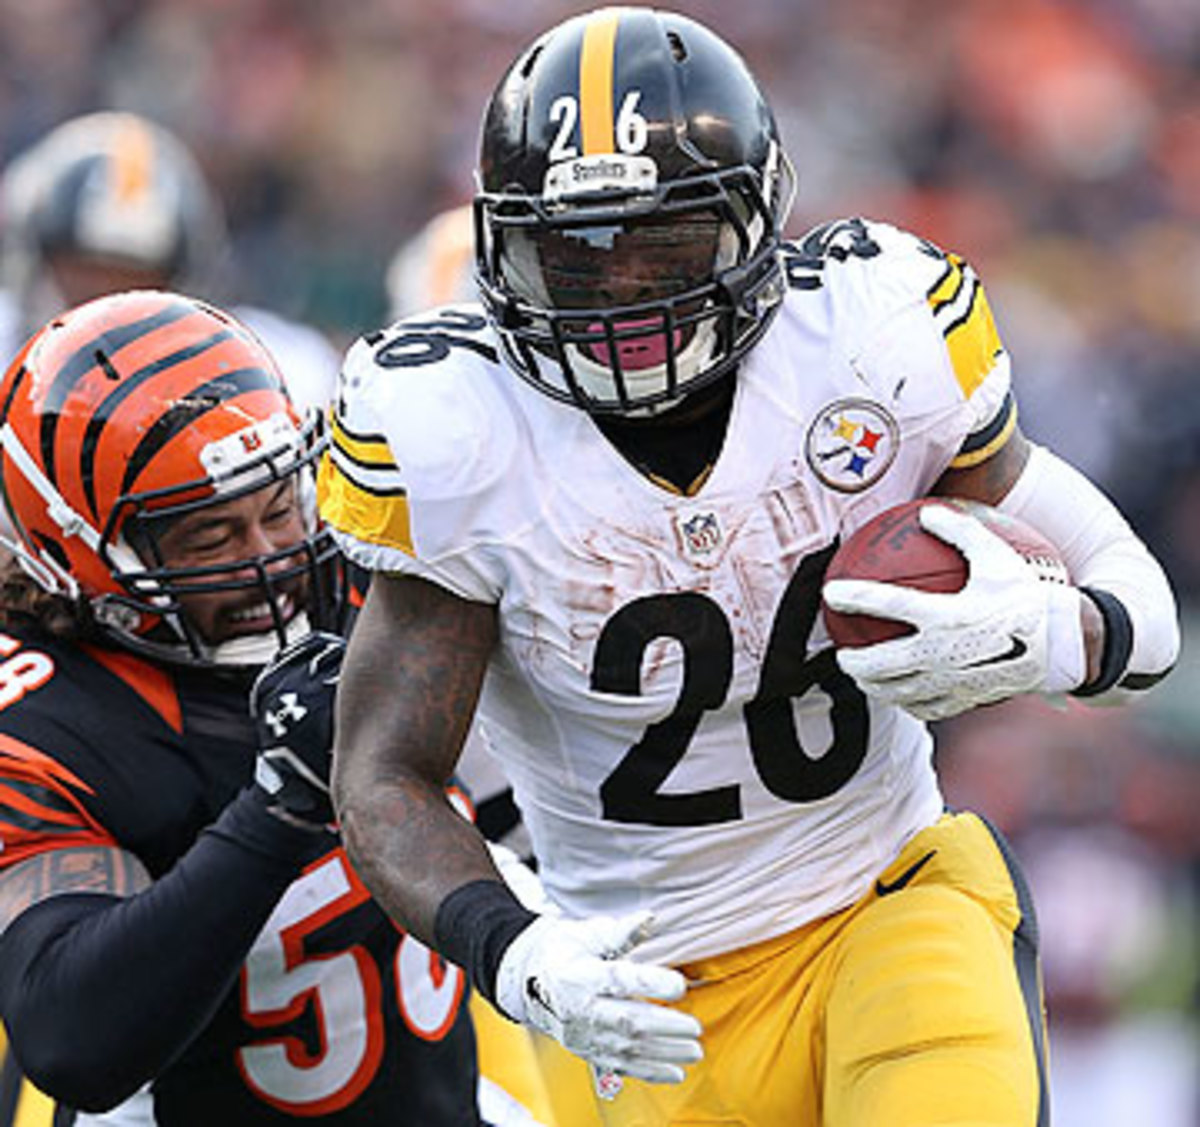 Le'Veon Bell rushed for 185 yards in Pittsburgh's 42-21 win over Cincy in Week 14. (Andy Lyons/Getty Images)